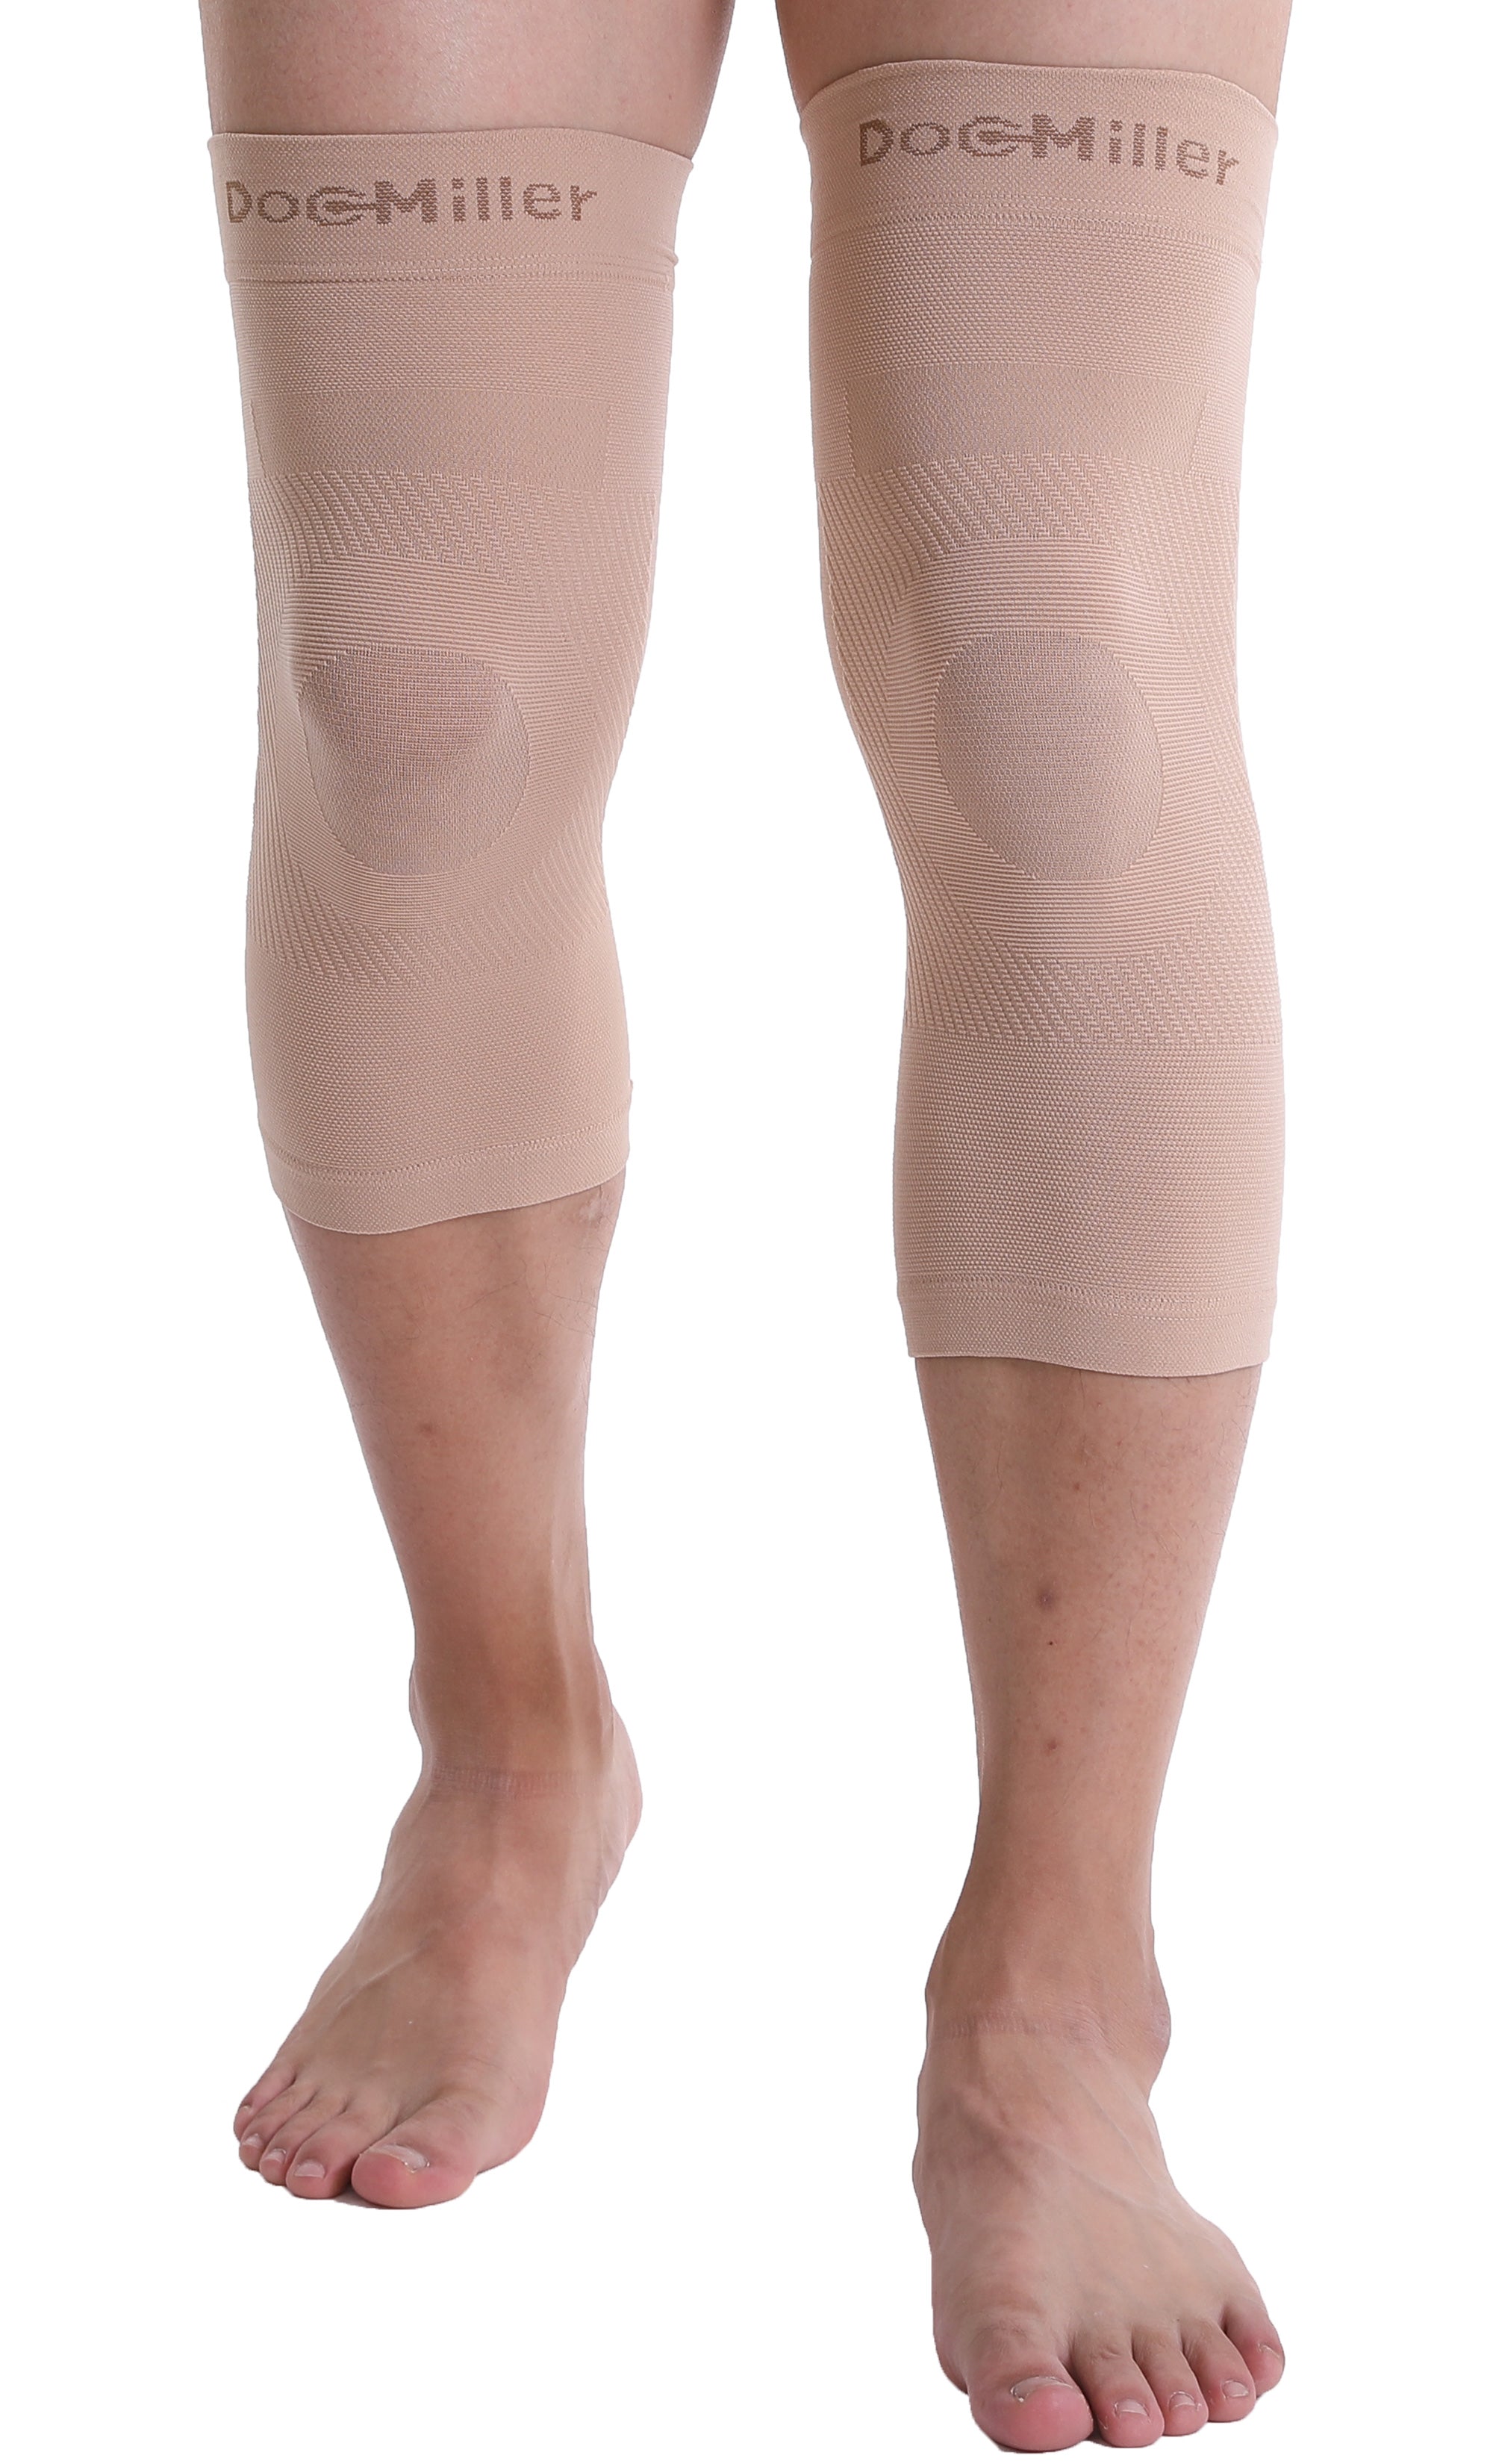 Doc Miller Knee Compression Sleeve (1 Pair) Support for Running, Hikin